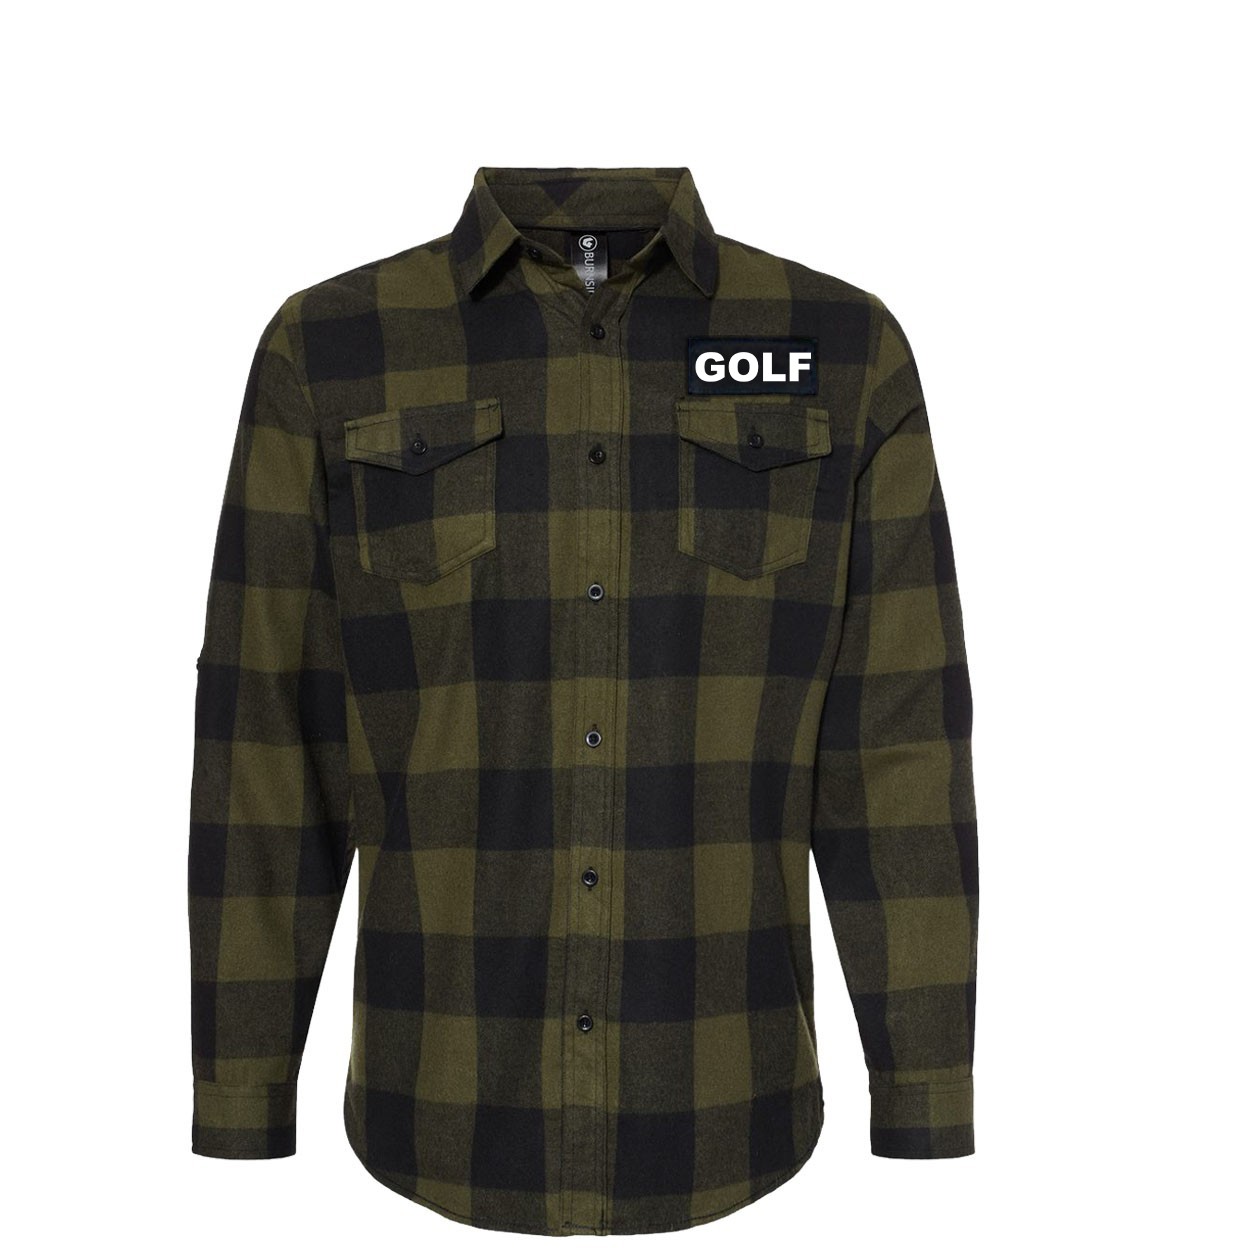 Golf Brand Logo Classic Unisex Long Sleeve Woven Patch Flannel Shirt Army/Black (White Logo)